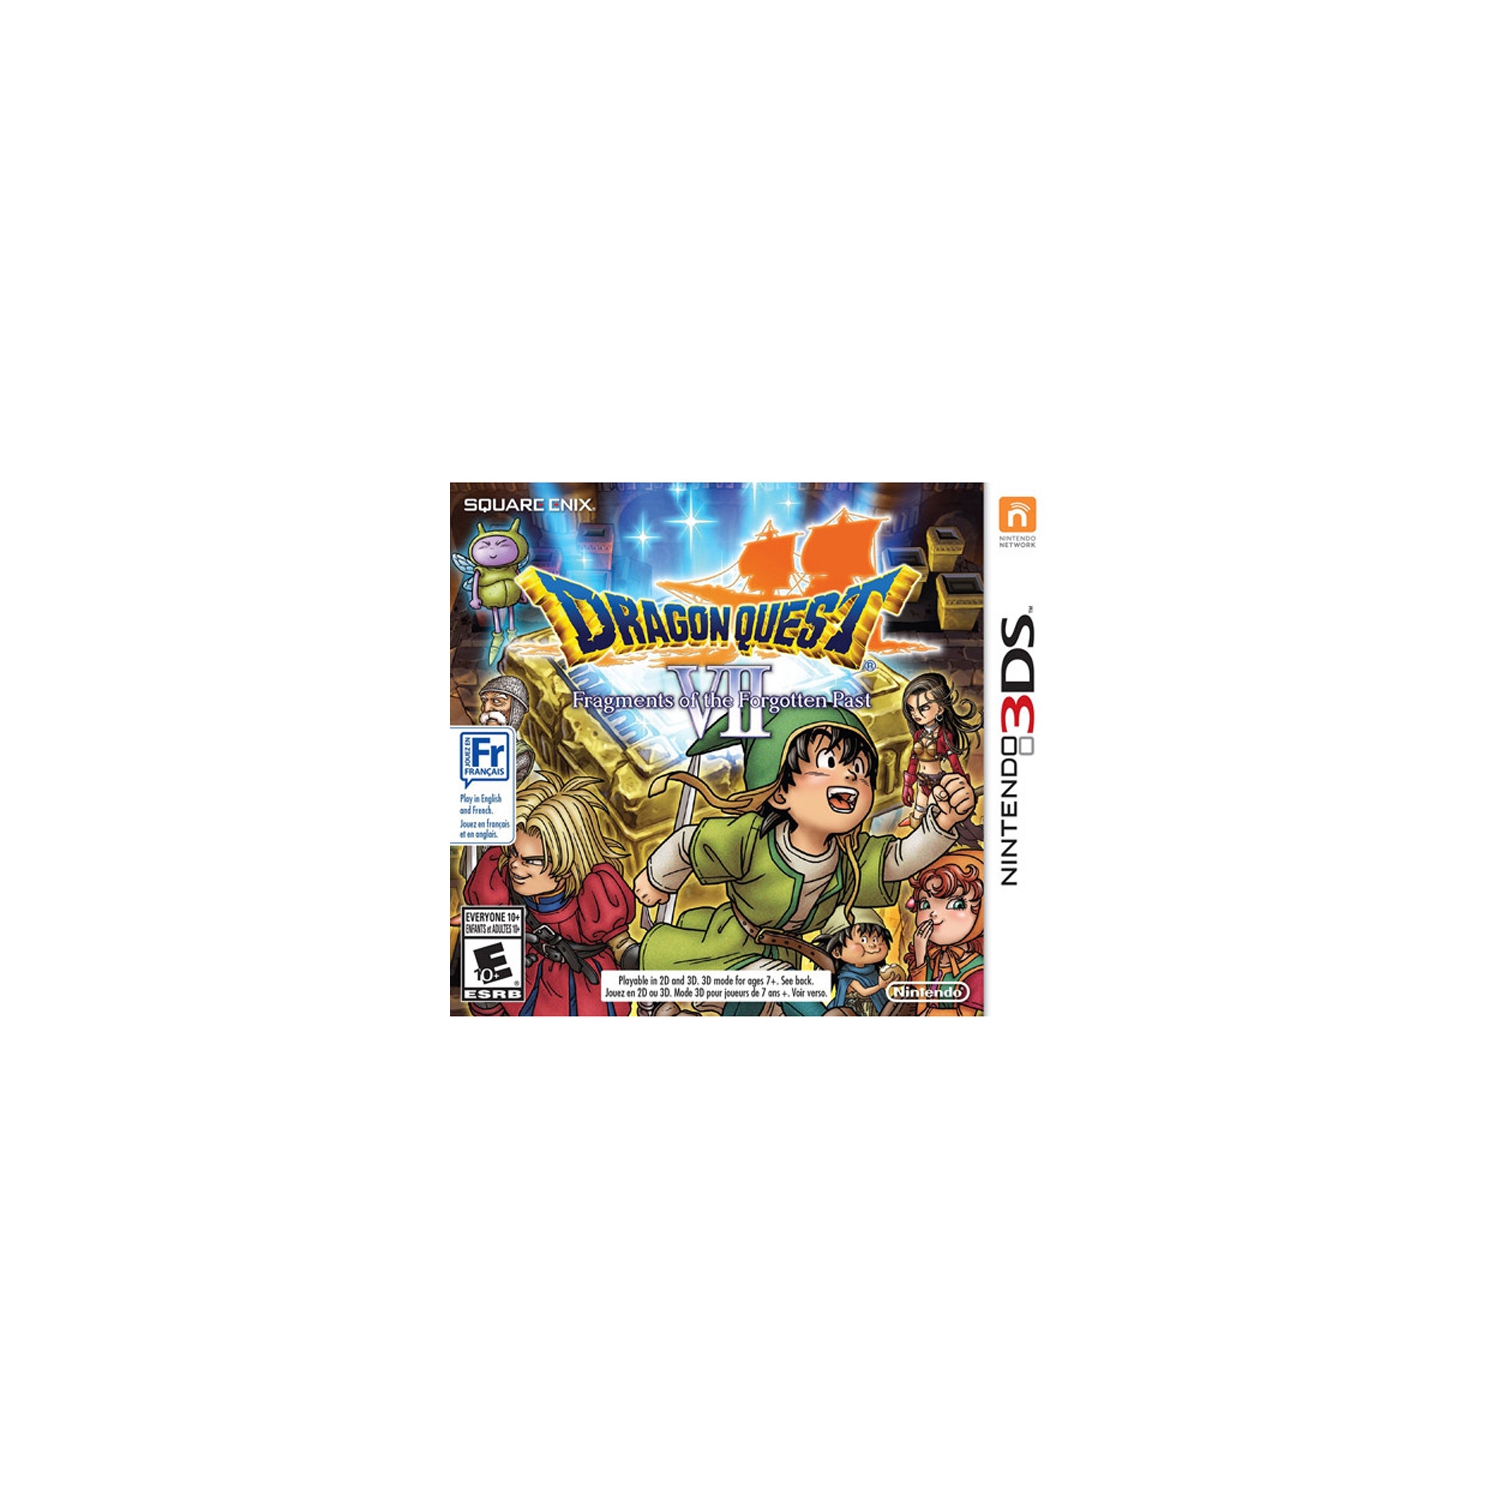 Dragon Quest Vii 7 Fragments Of The Forgotten Past (3DS)